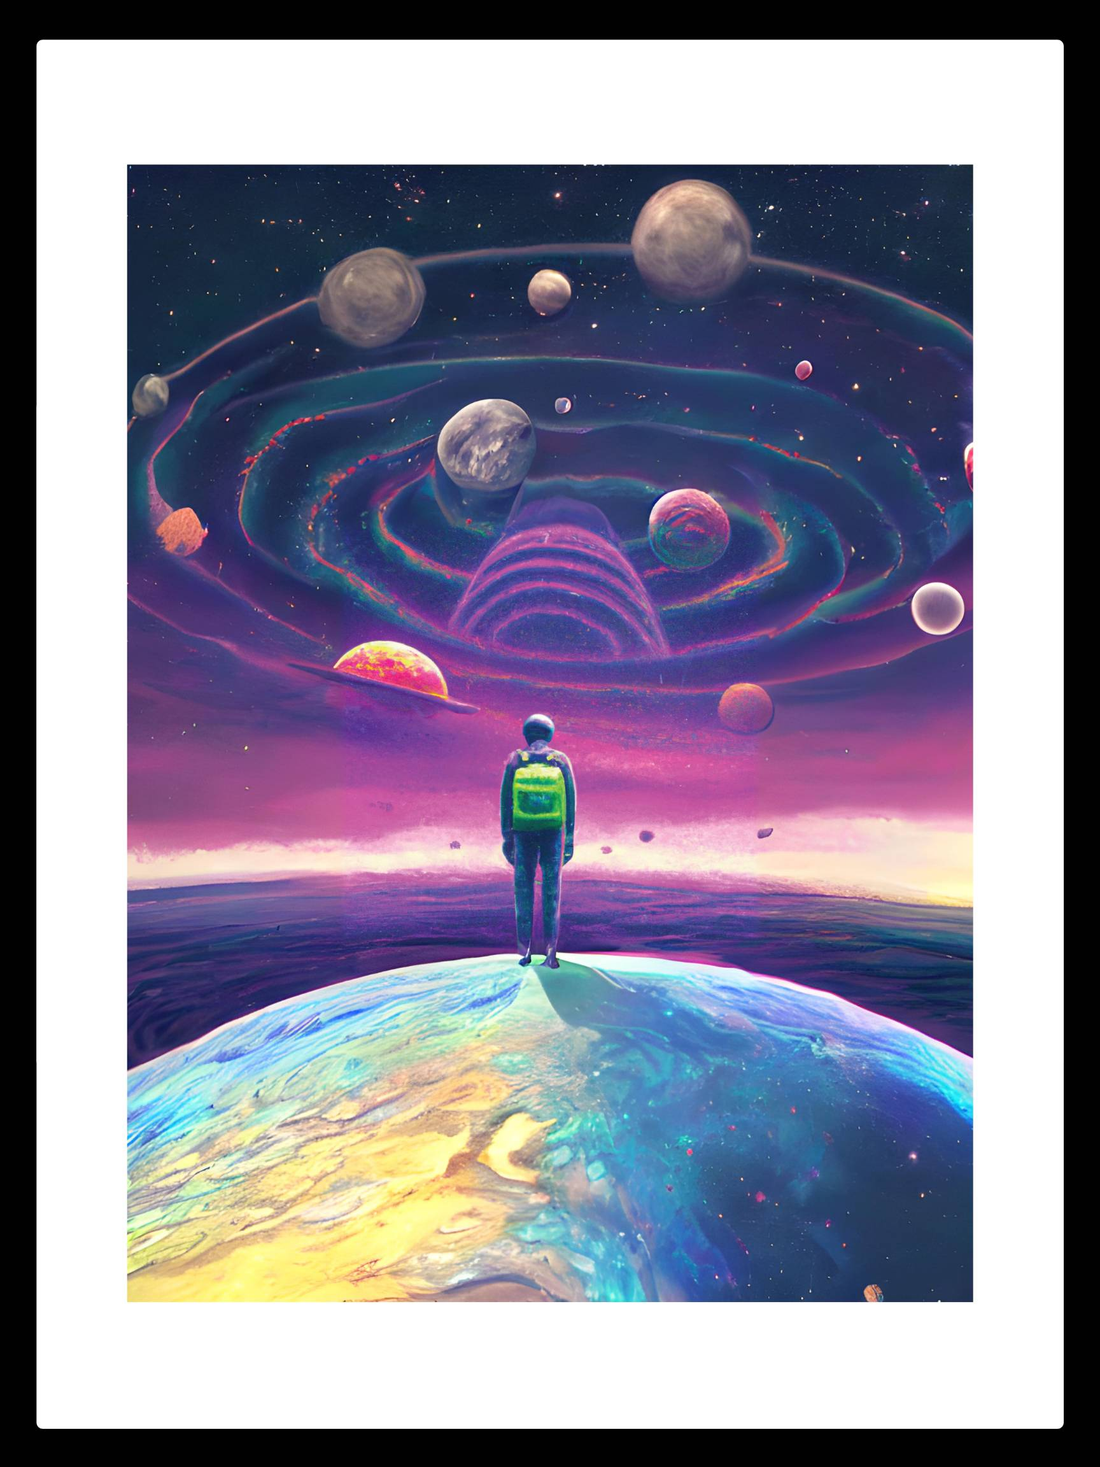 A figure gazes outwards to the majestic dance of planets in space, encapsulated in this artwork that invites viewers on a silent cosmic journey.